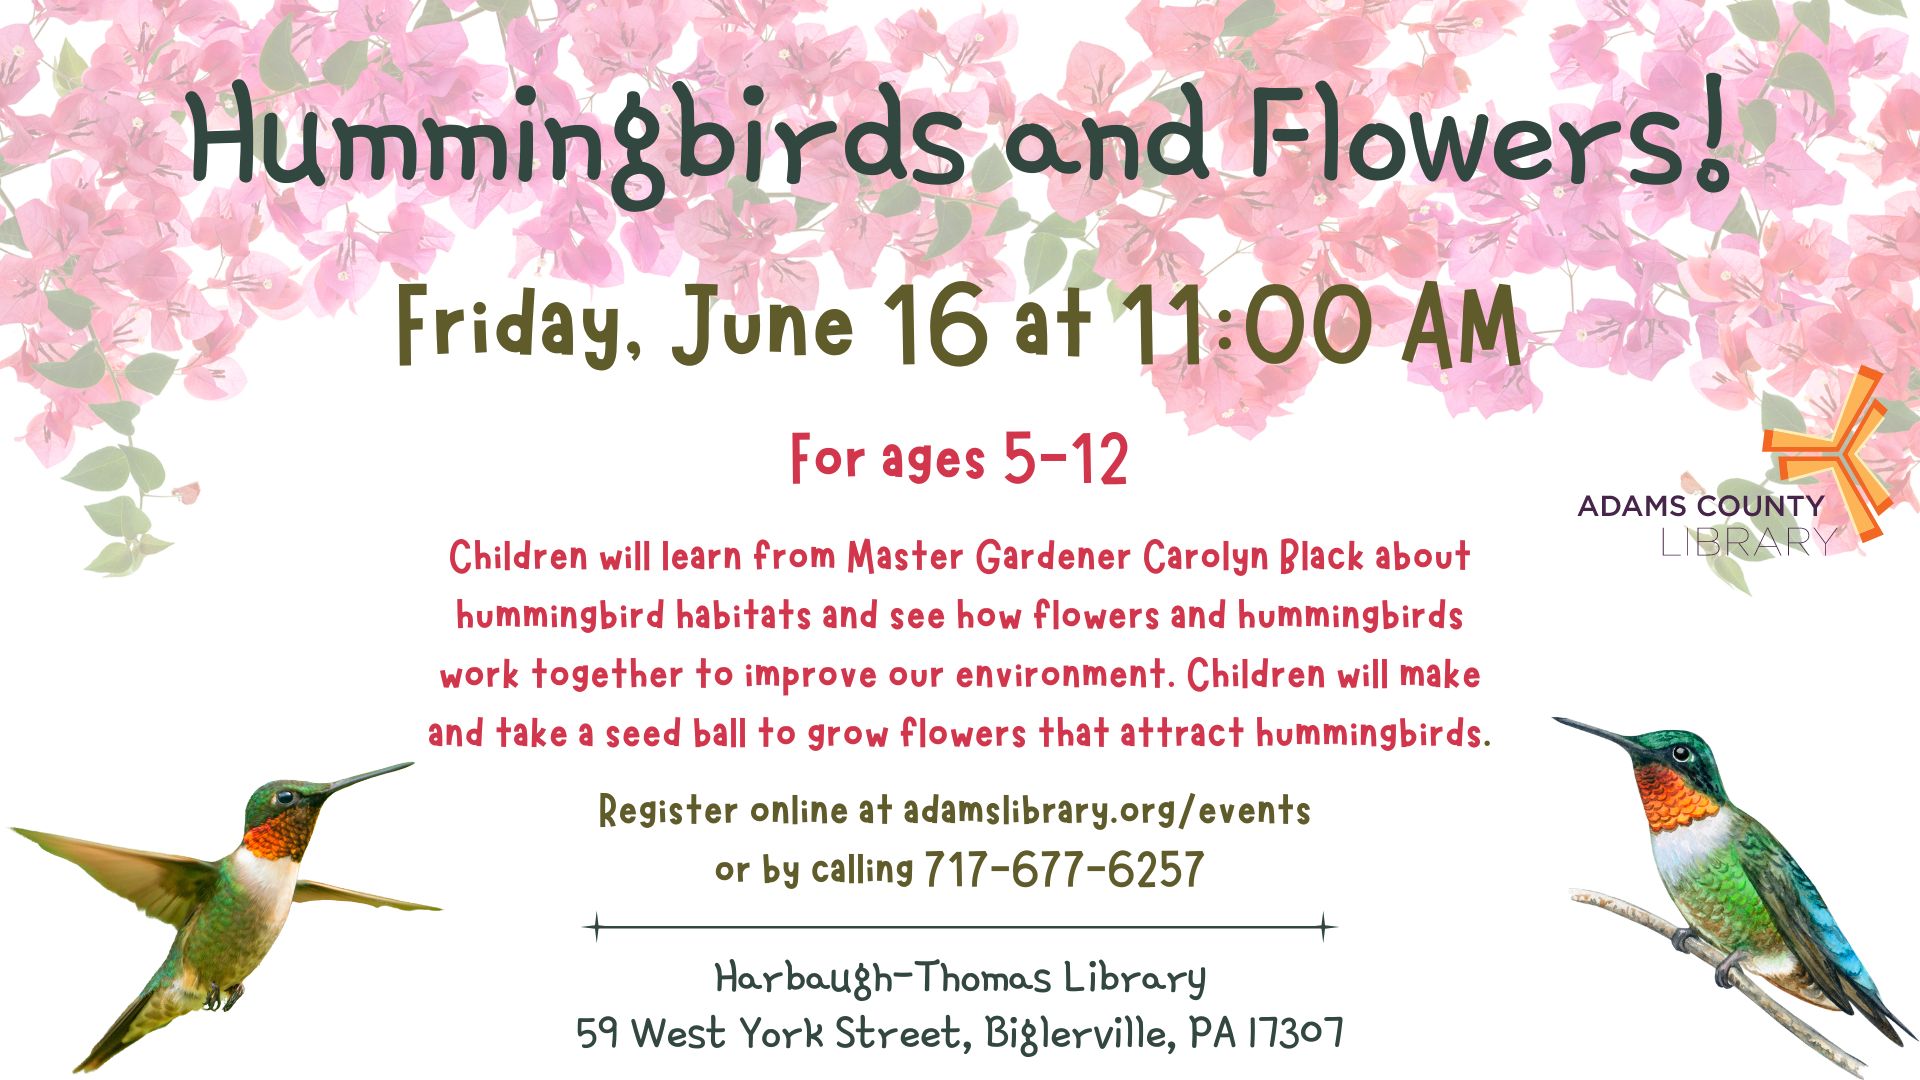 Hummingbirds and Flowers Friday June 16 at 11:00 AM